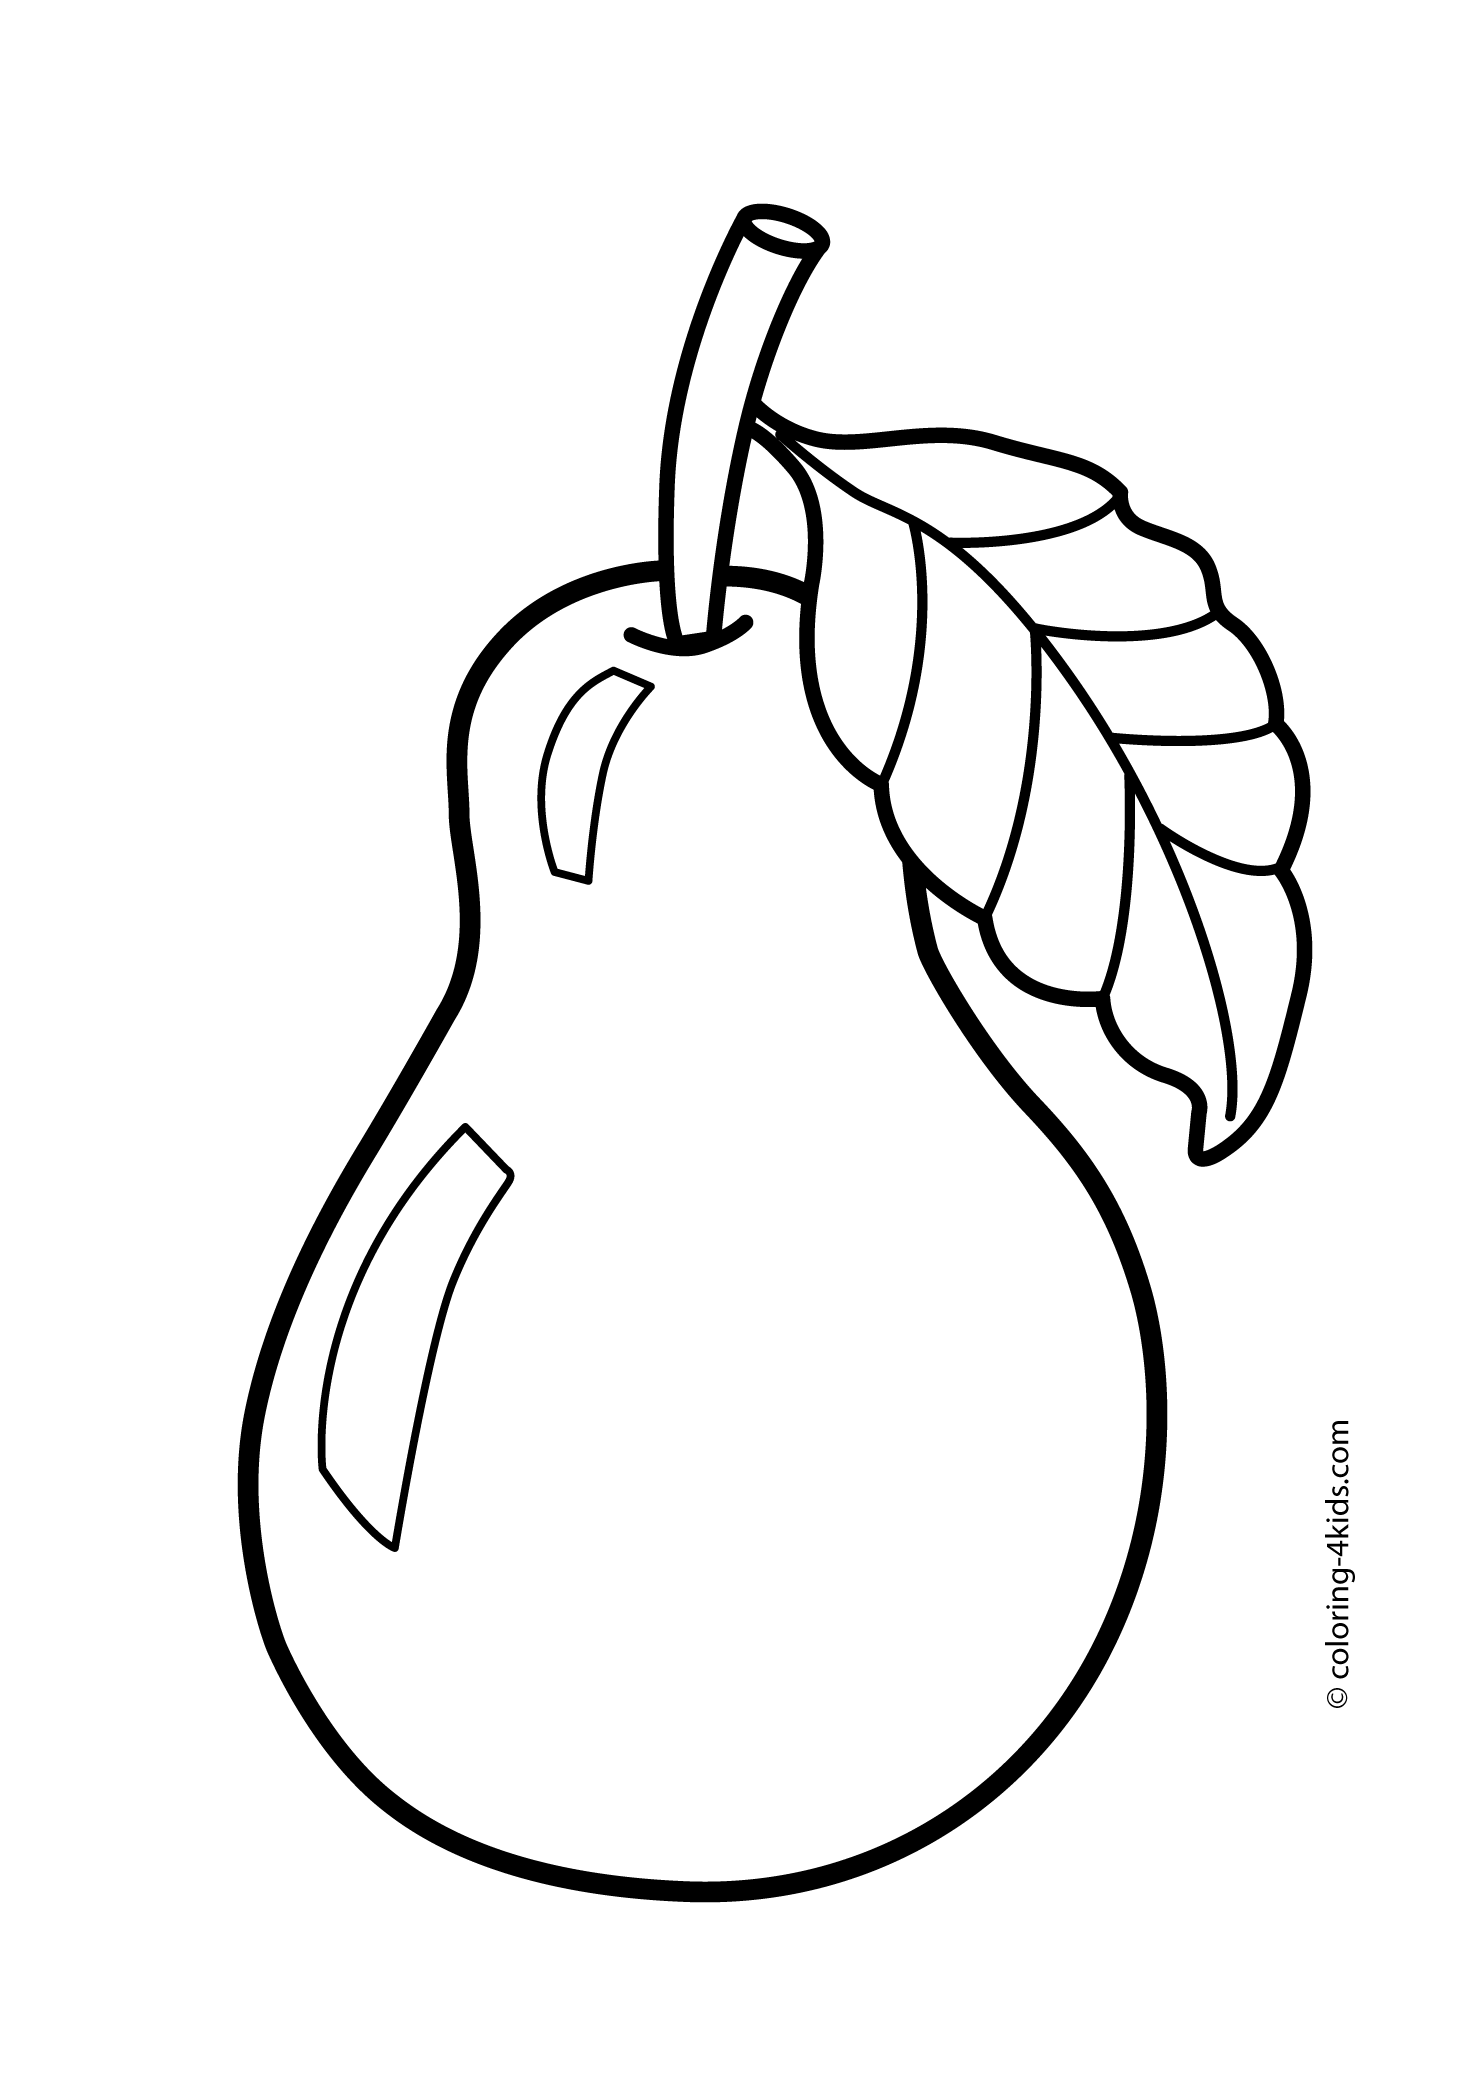 Pear Fruits coloring pages for kids, printable free | Fruit coloring pages,  Kindergarten coloring pages, Apple coloring pages